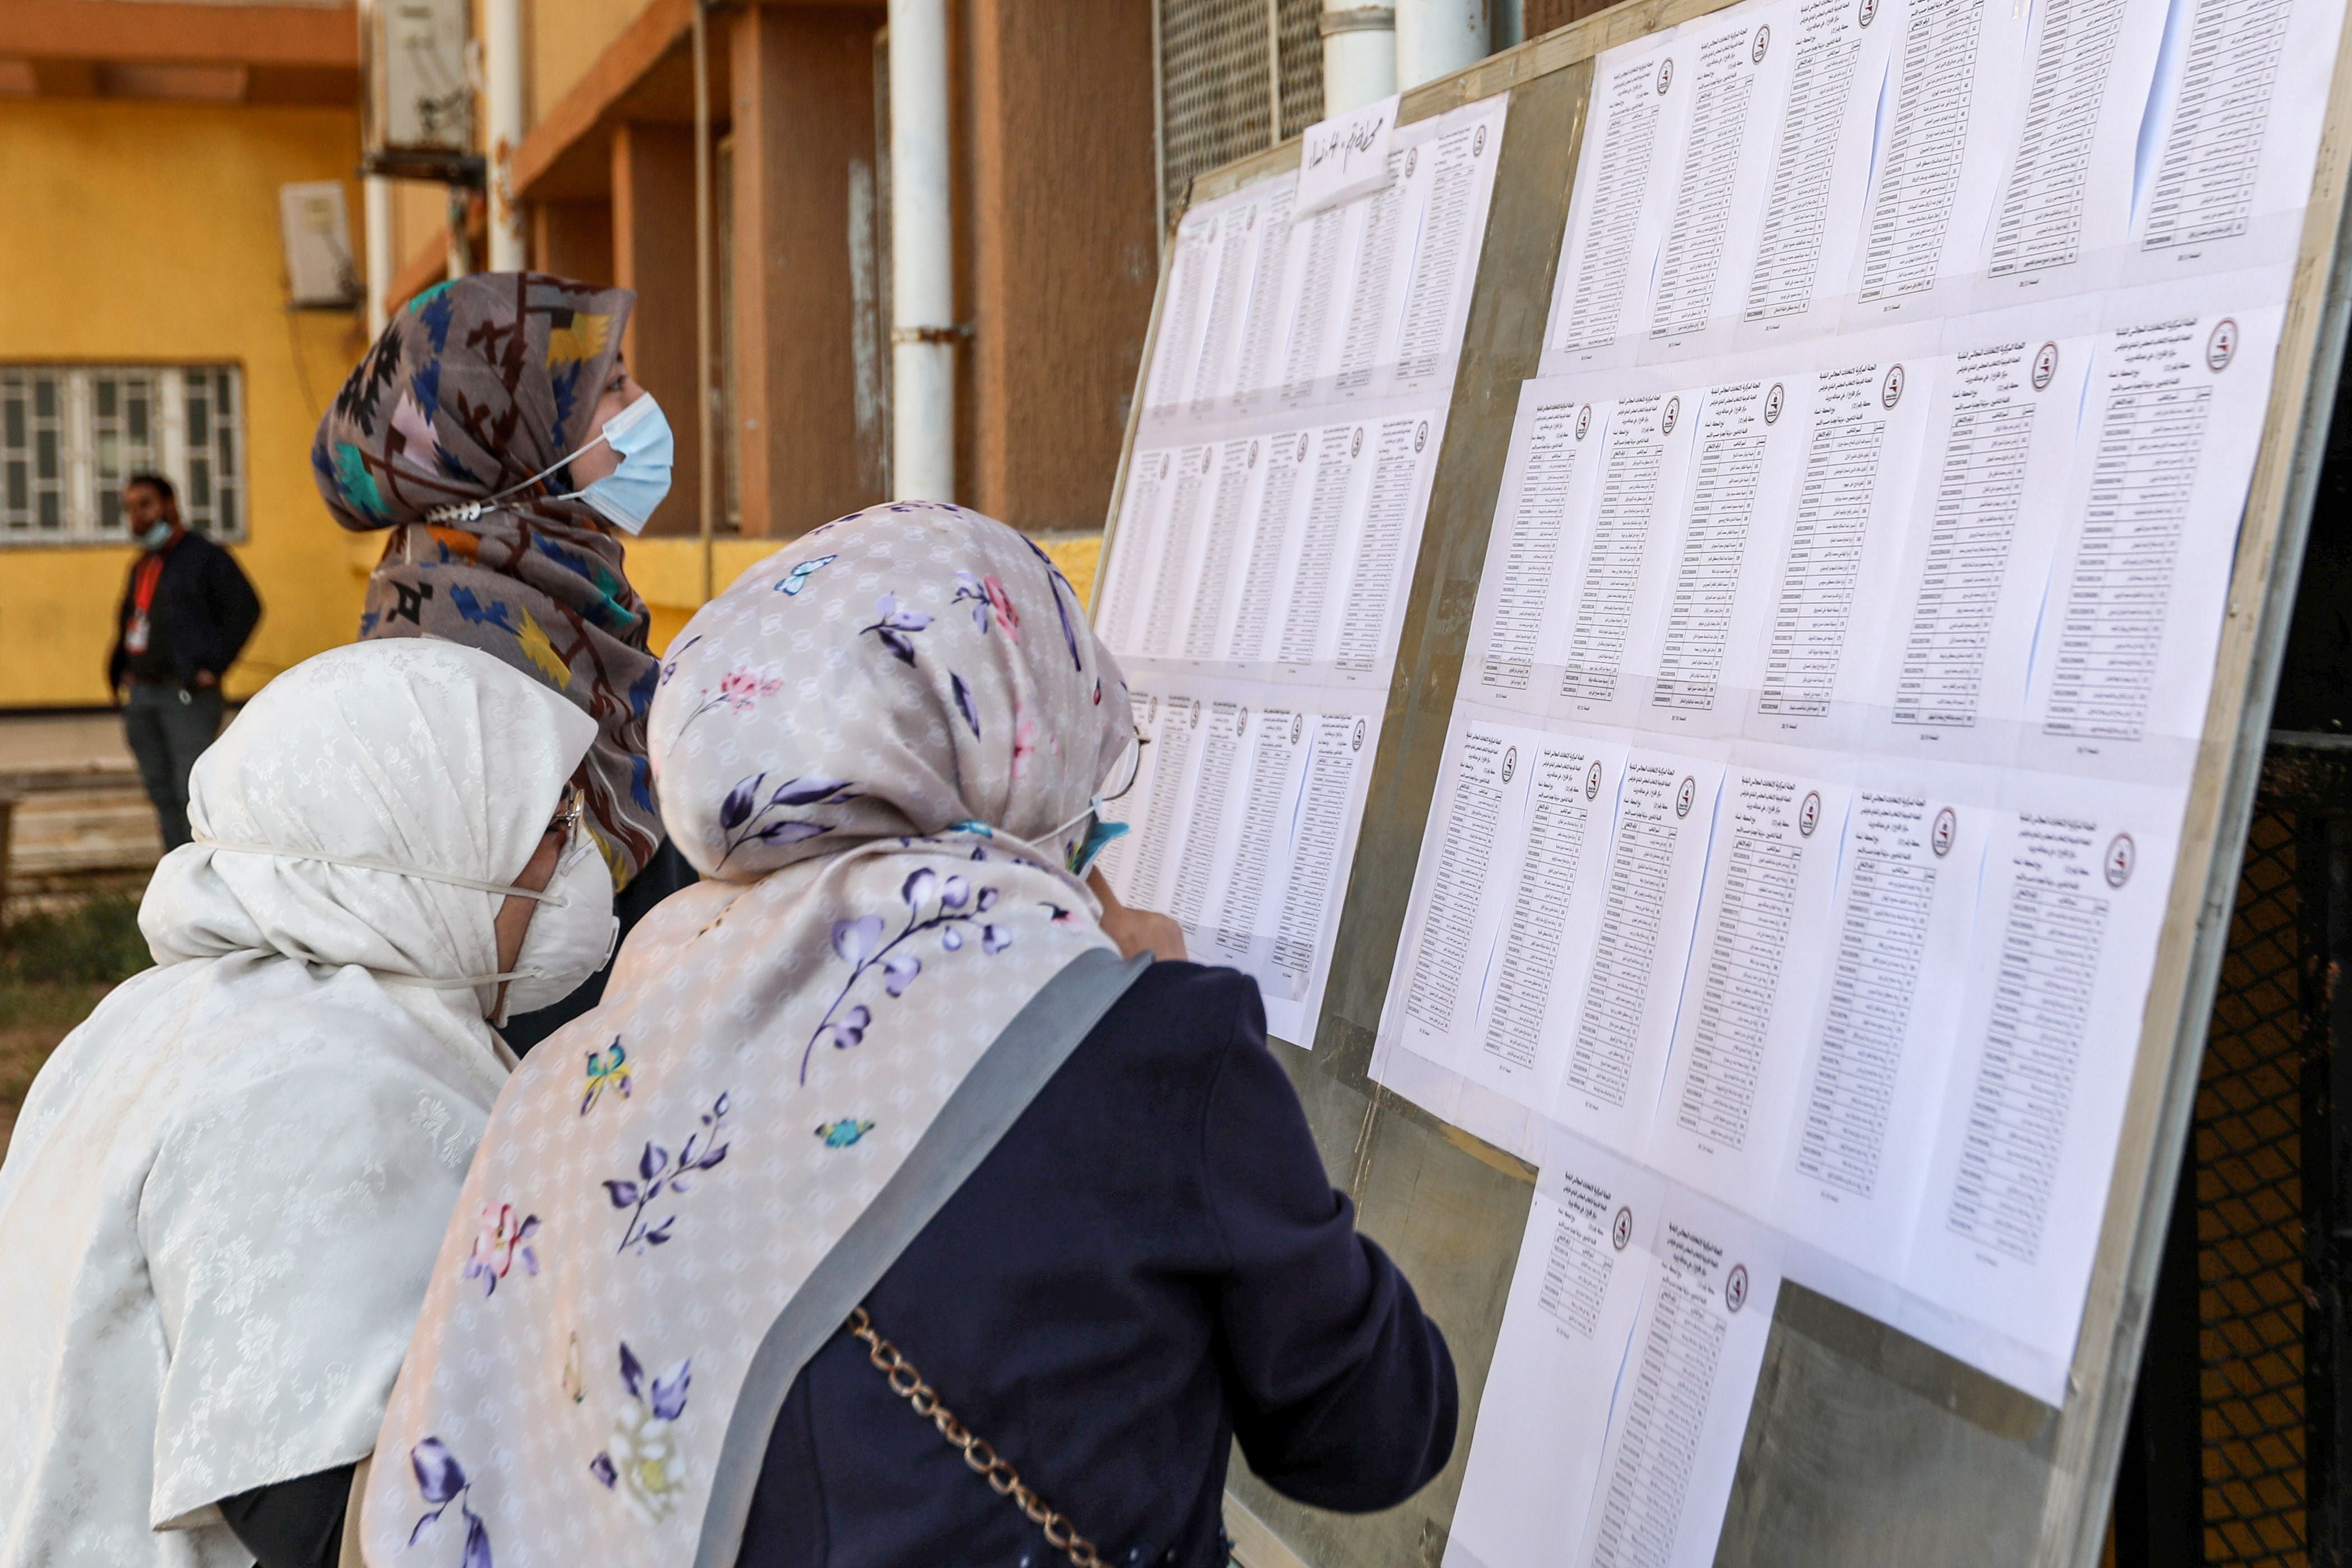 Voters check the electoral lists